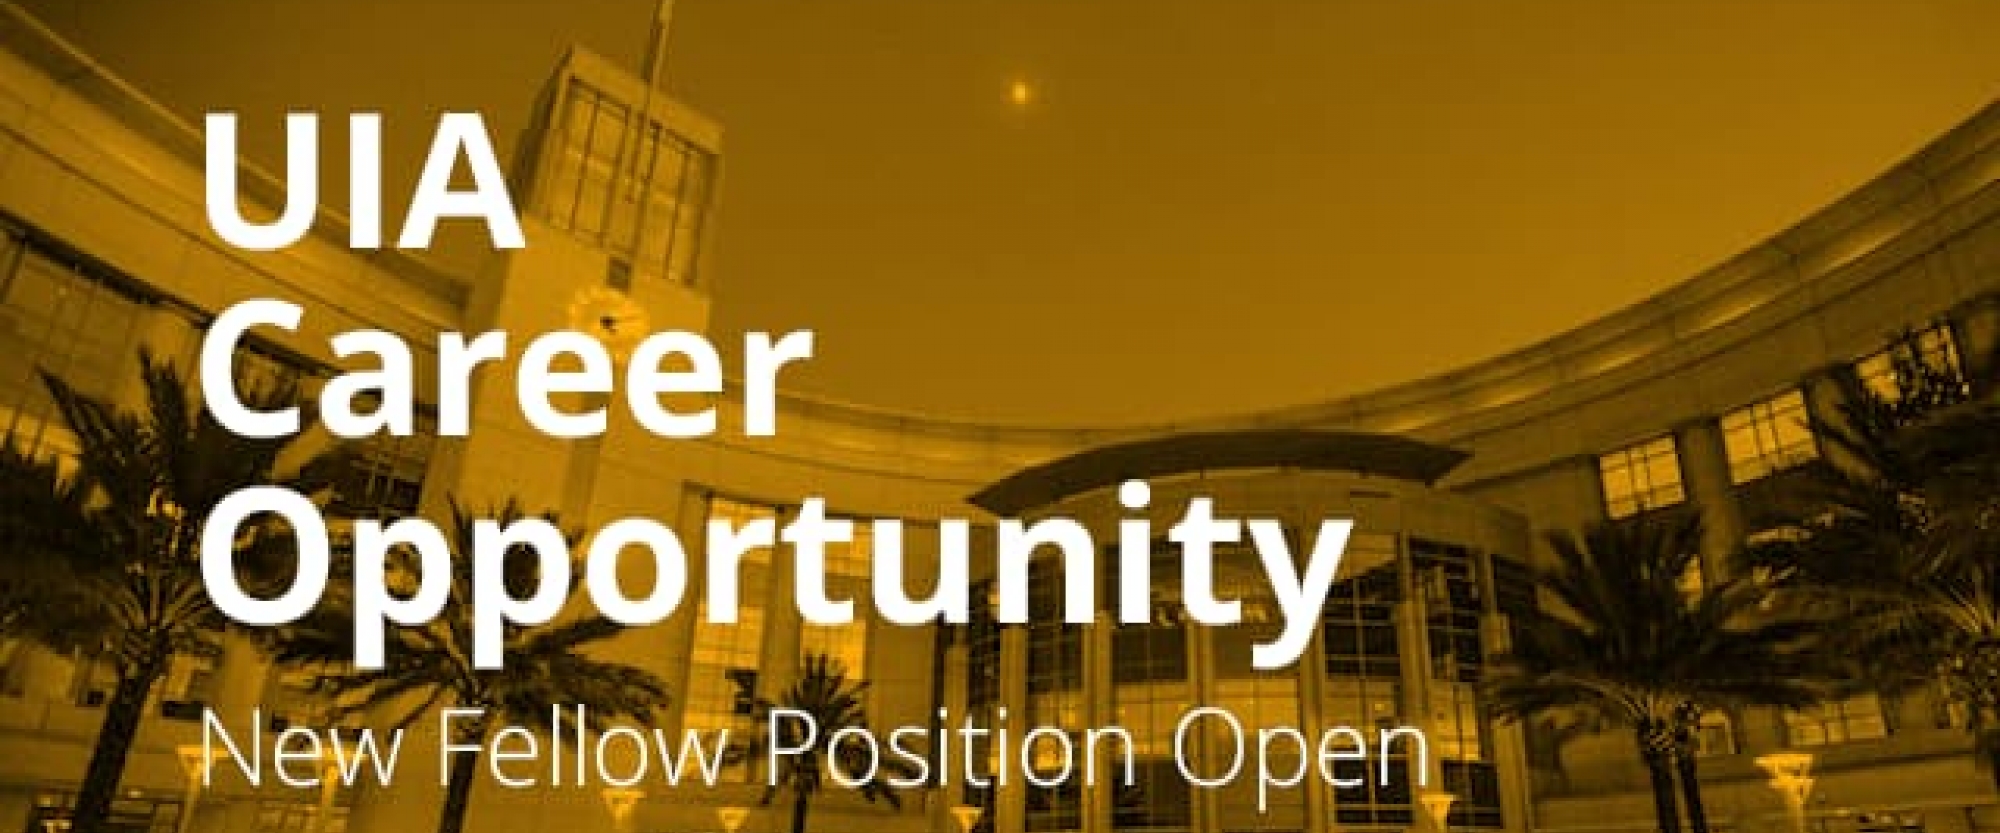 New Career Opportunity with the UIA